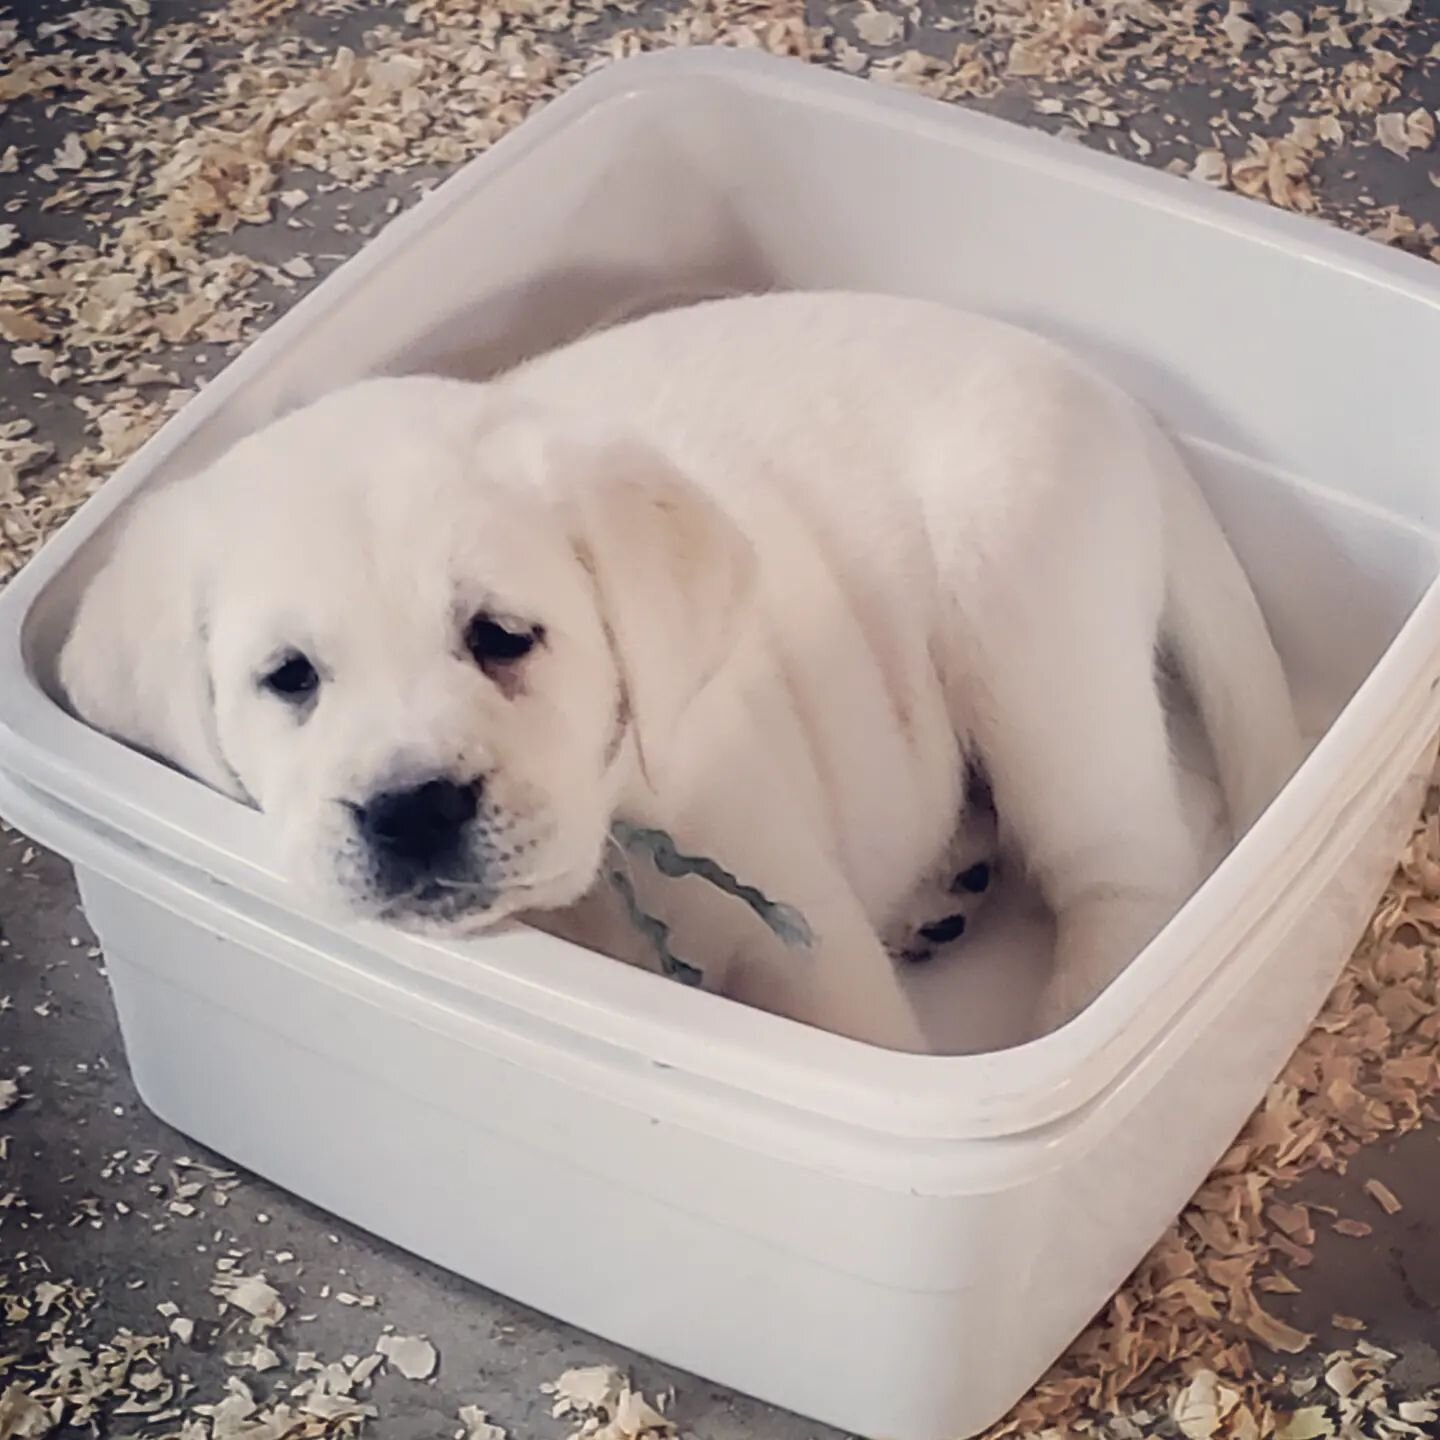 Miss Teal would rather climb inside your Easter basket. Hop on your message button and fetch mom for details about this goldadorable. 

#mybuckeyekennels #mybuckeyebaby #goldadorpuppy